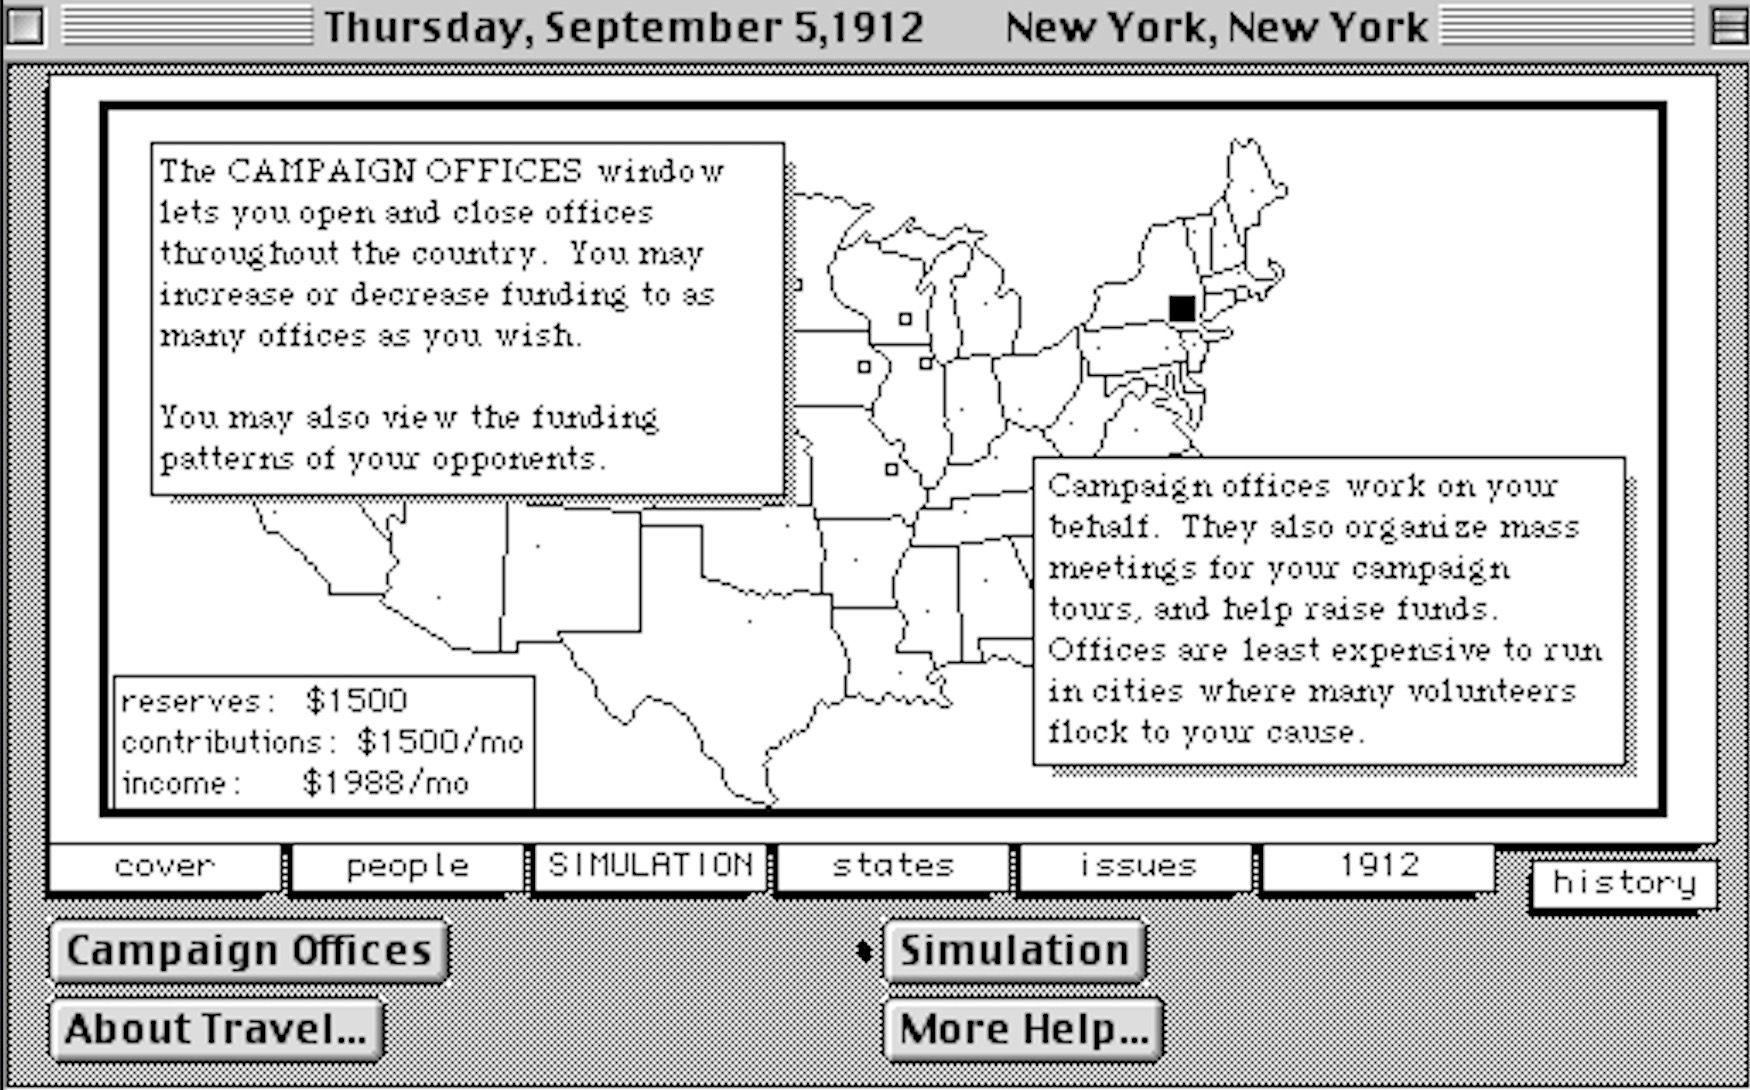 The Election of 1912